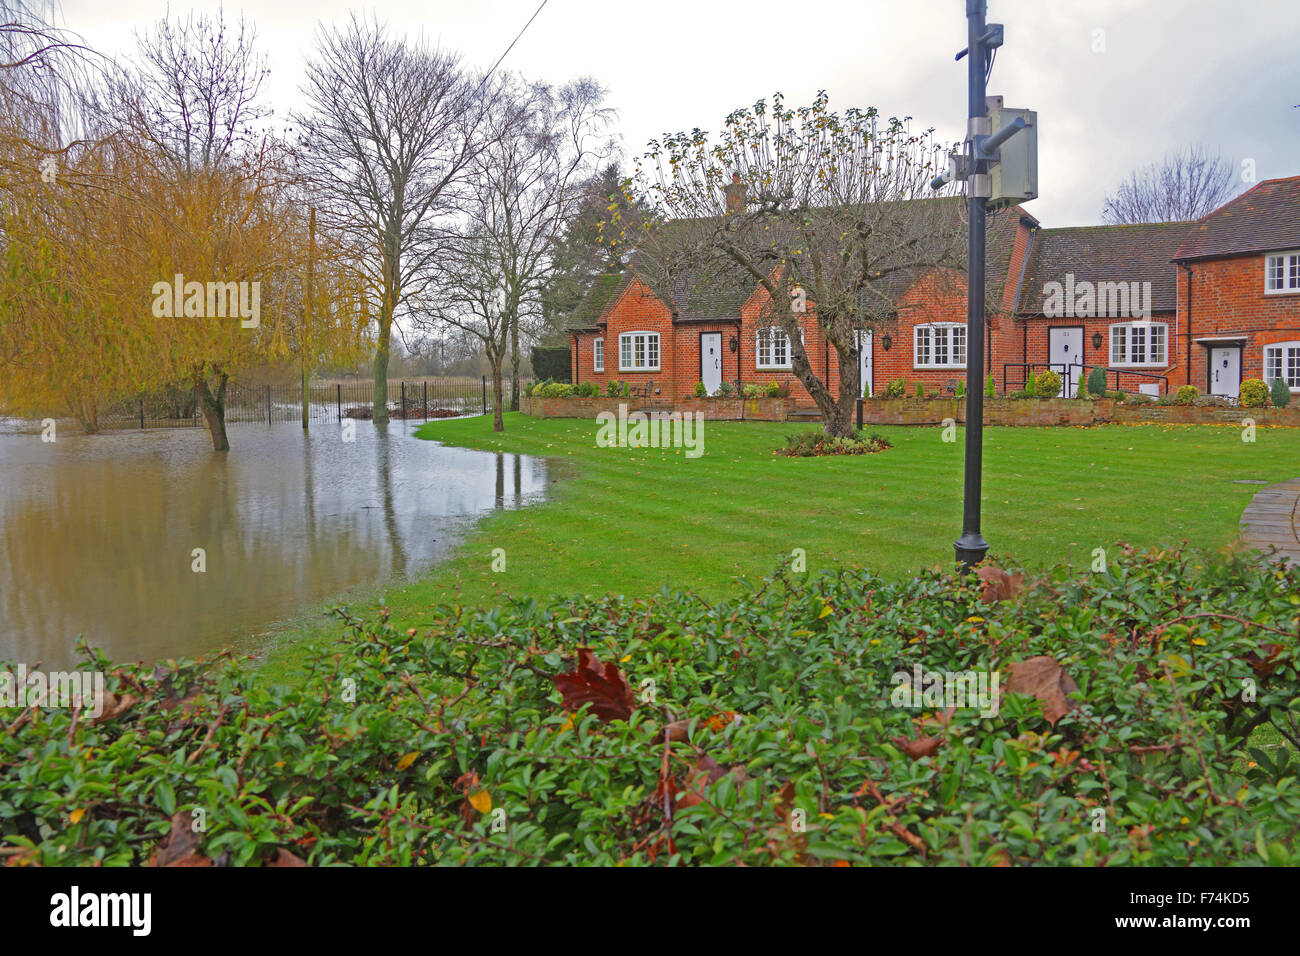 Flooding along the Thames reduces a garden to a lake over the front lawn with ominous rainclouds in the background. Stock Photo